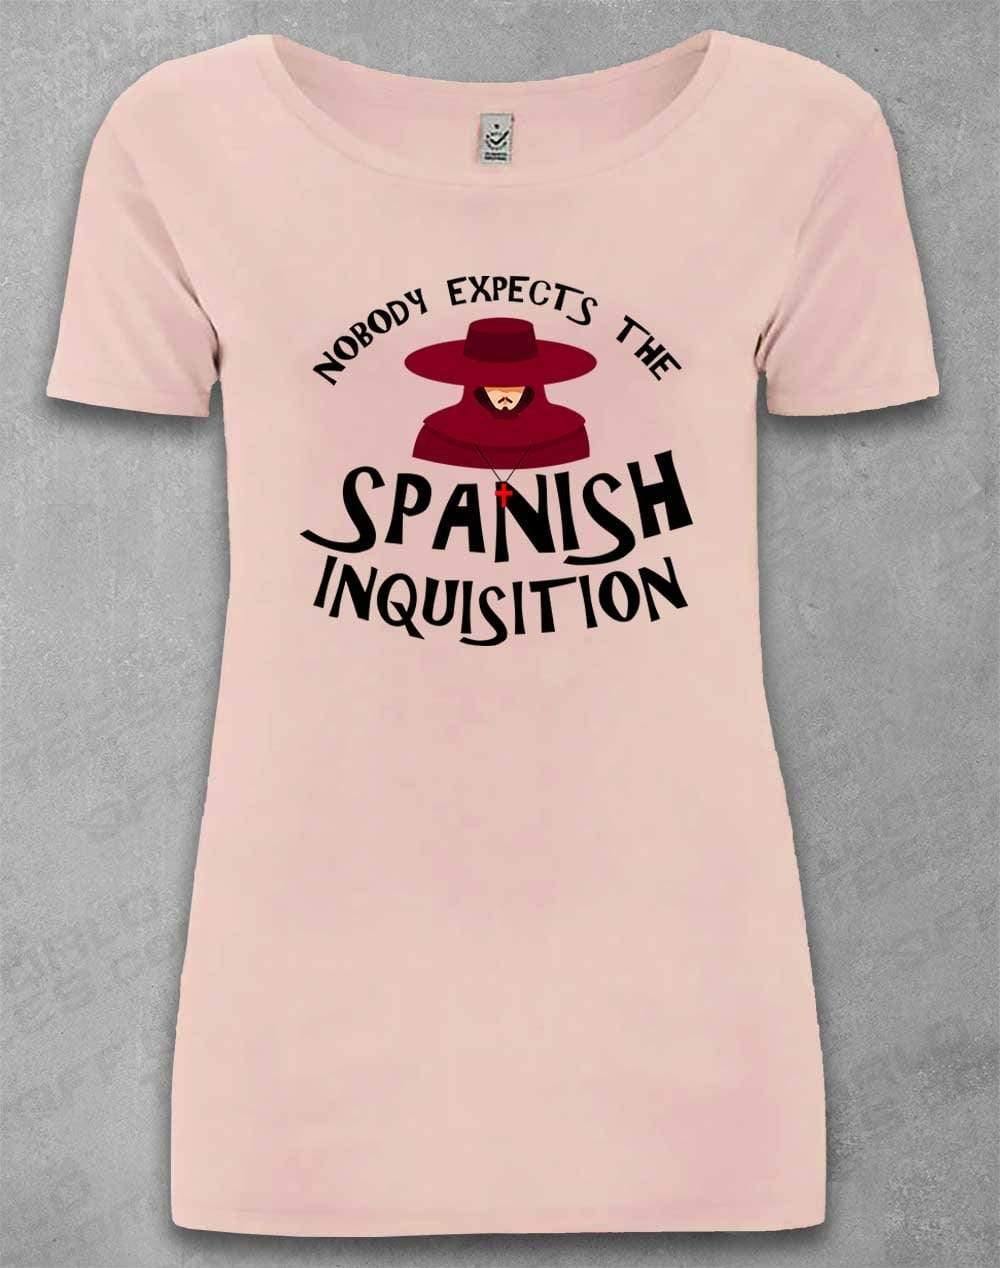 DELUXE Nobody Expects the Spanish Inquisition Organic Scoop Neck T-Shirt 8-10 / Light Pink  - Off World Tees